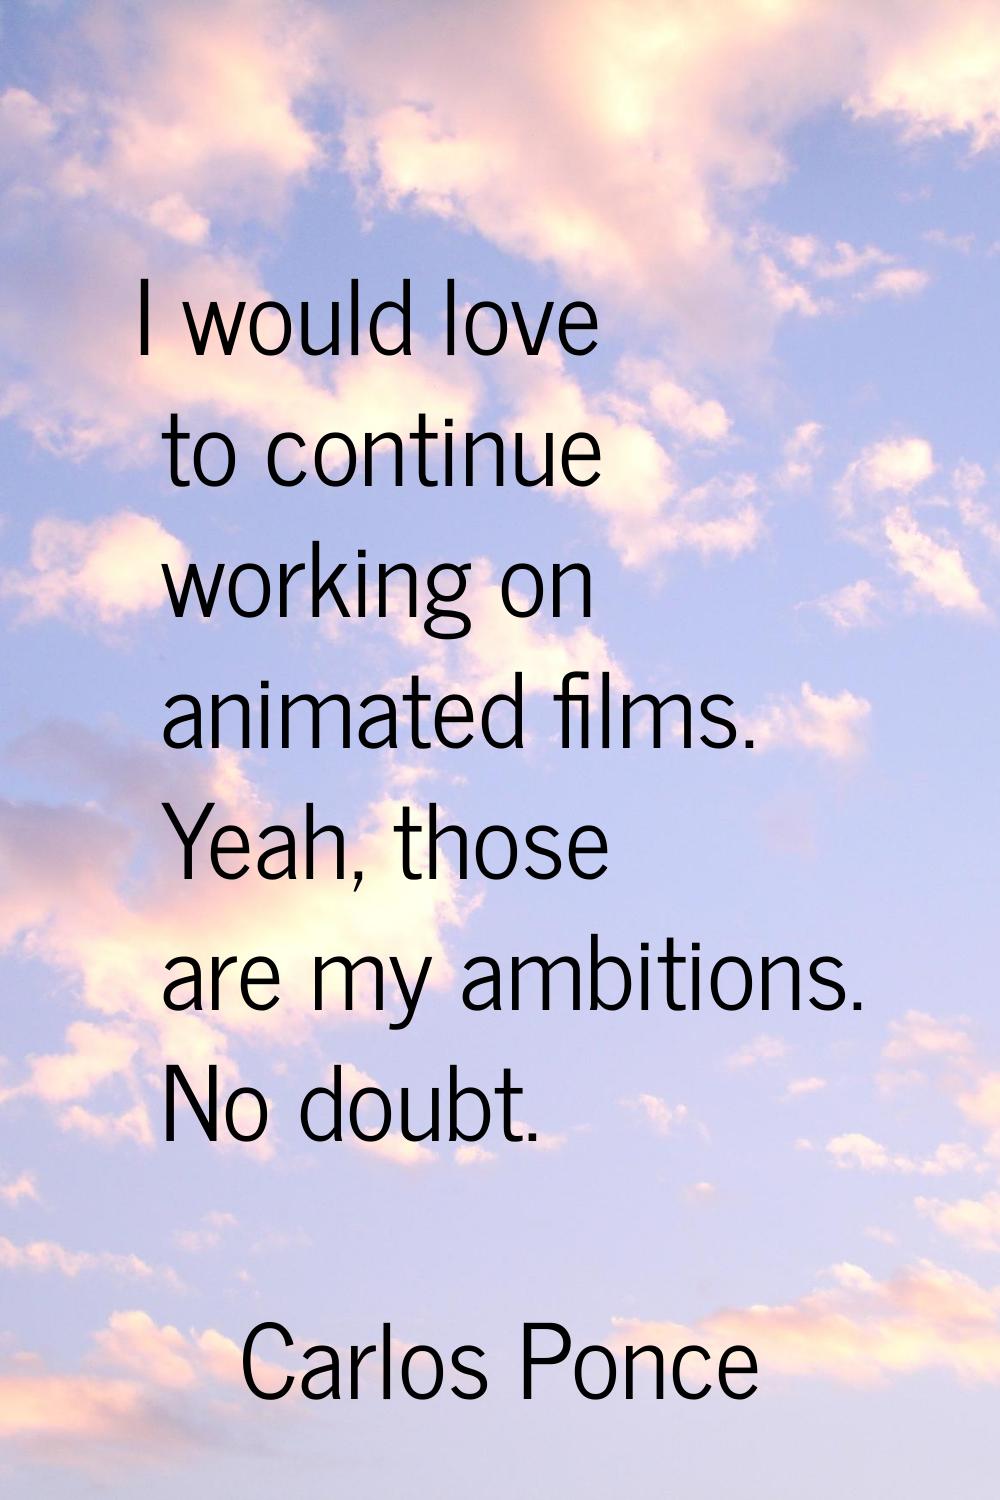 I would love to continue working on animated films. Yeah, those are my ambitions. No doubt.